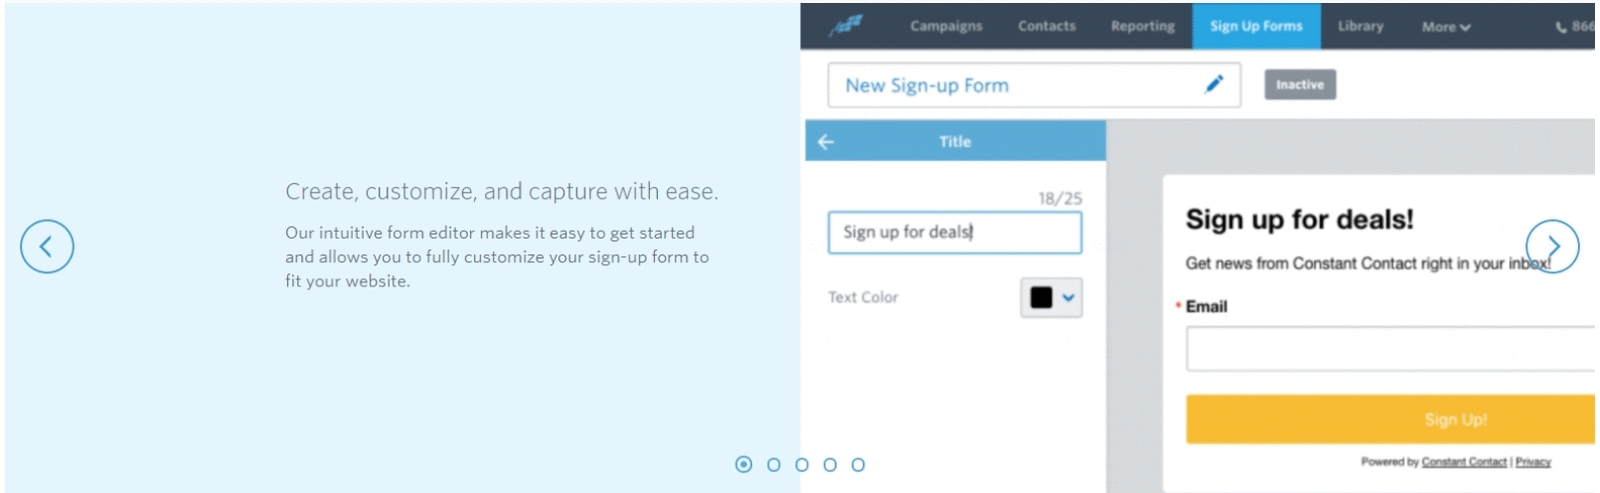 Sign up forms made simple 